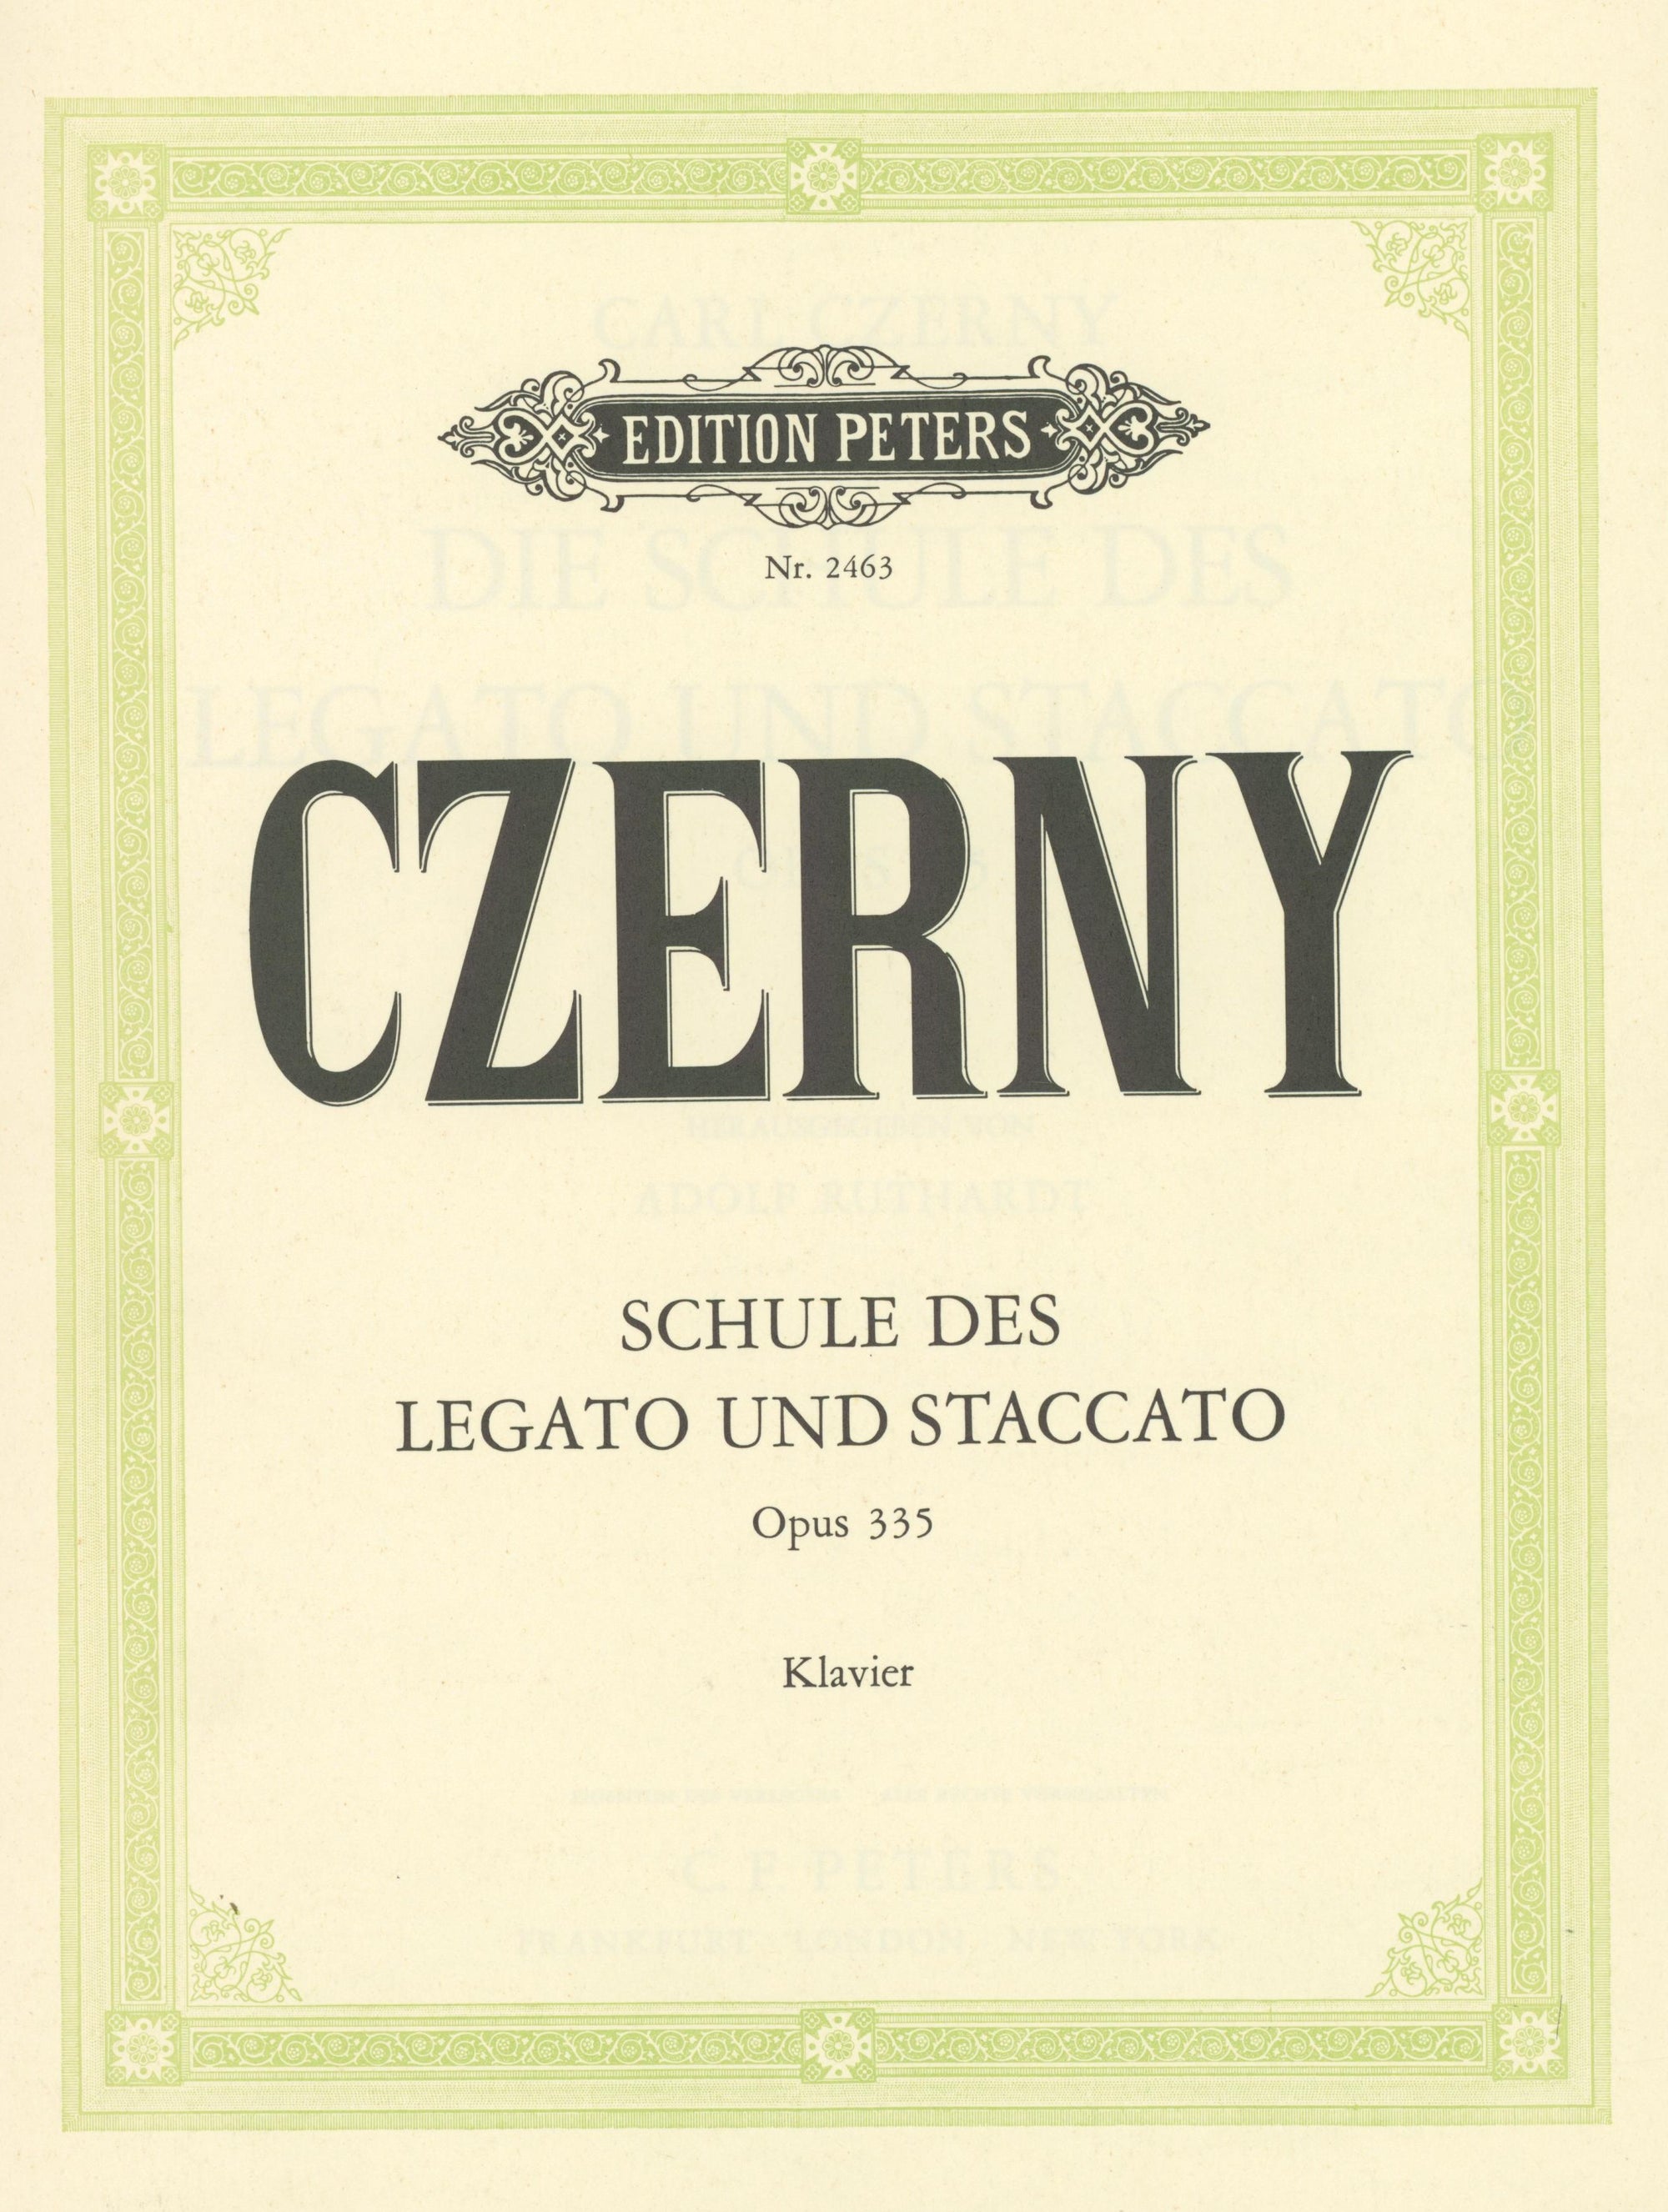 Czerny: School of Legato and Staccato, Op. 335